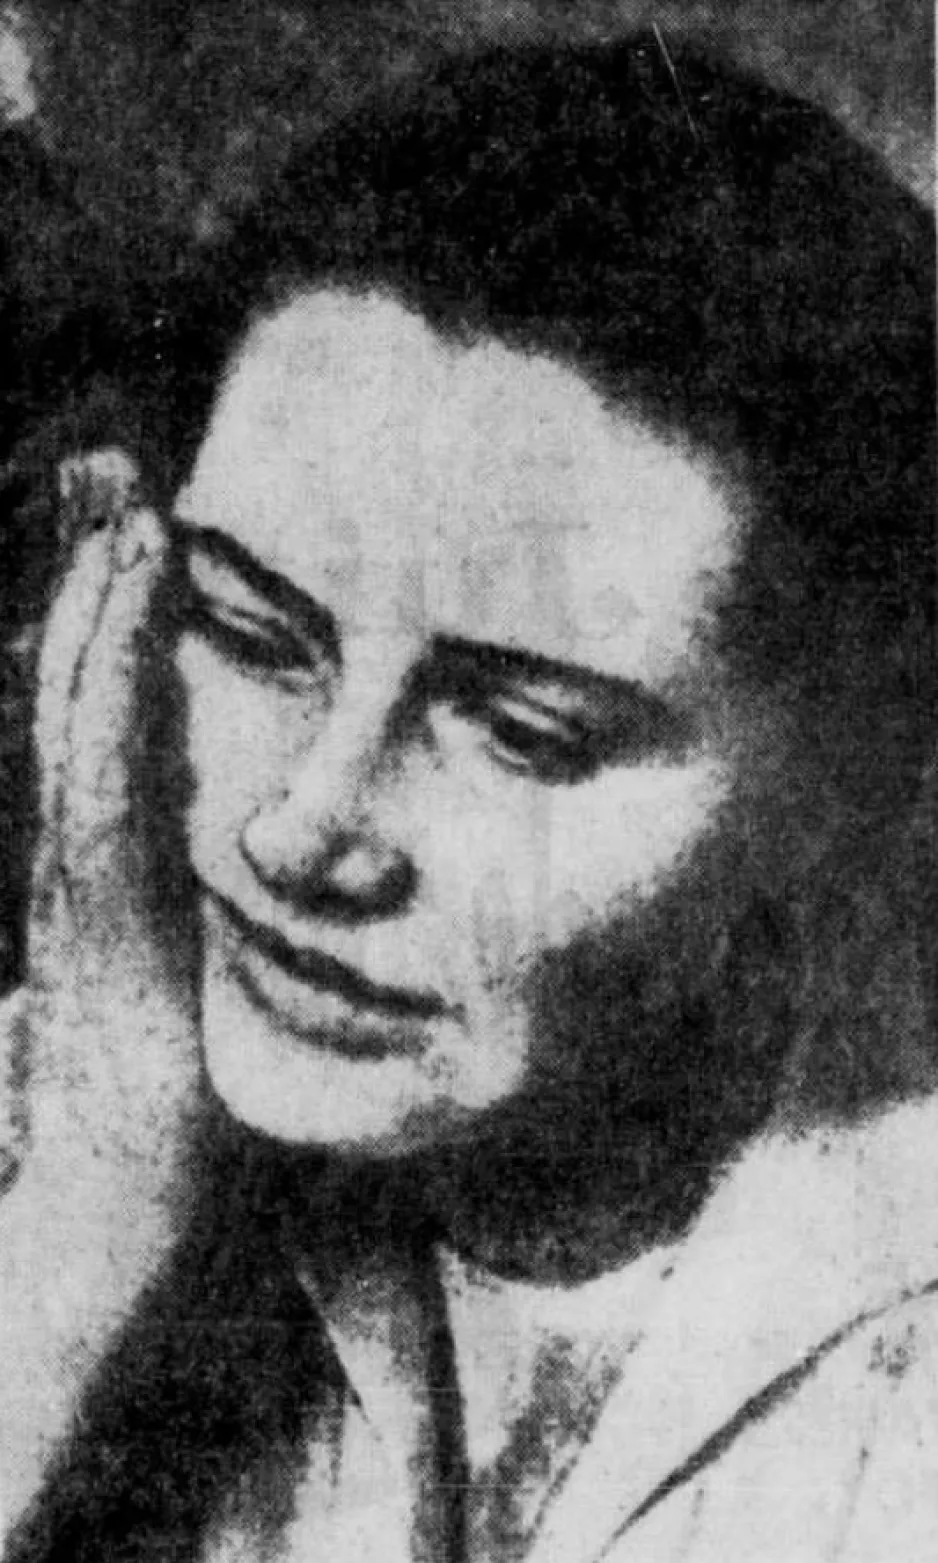 Gagarin’s wife, Valentina Ivanovna Gagarina, born Goryacheva, listening to a report on the radio about his space flight. Her concern is clearly visible. Anon., “Commentant le dernier exploit russe – Les États-Unis tirent de l’arrière (Kennedy).” Le Soleil, 13 April 1961, 23.